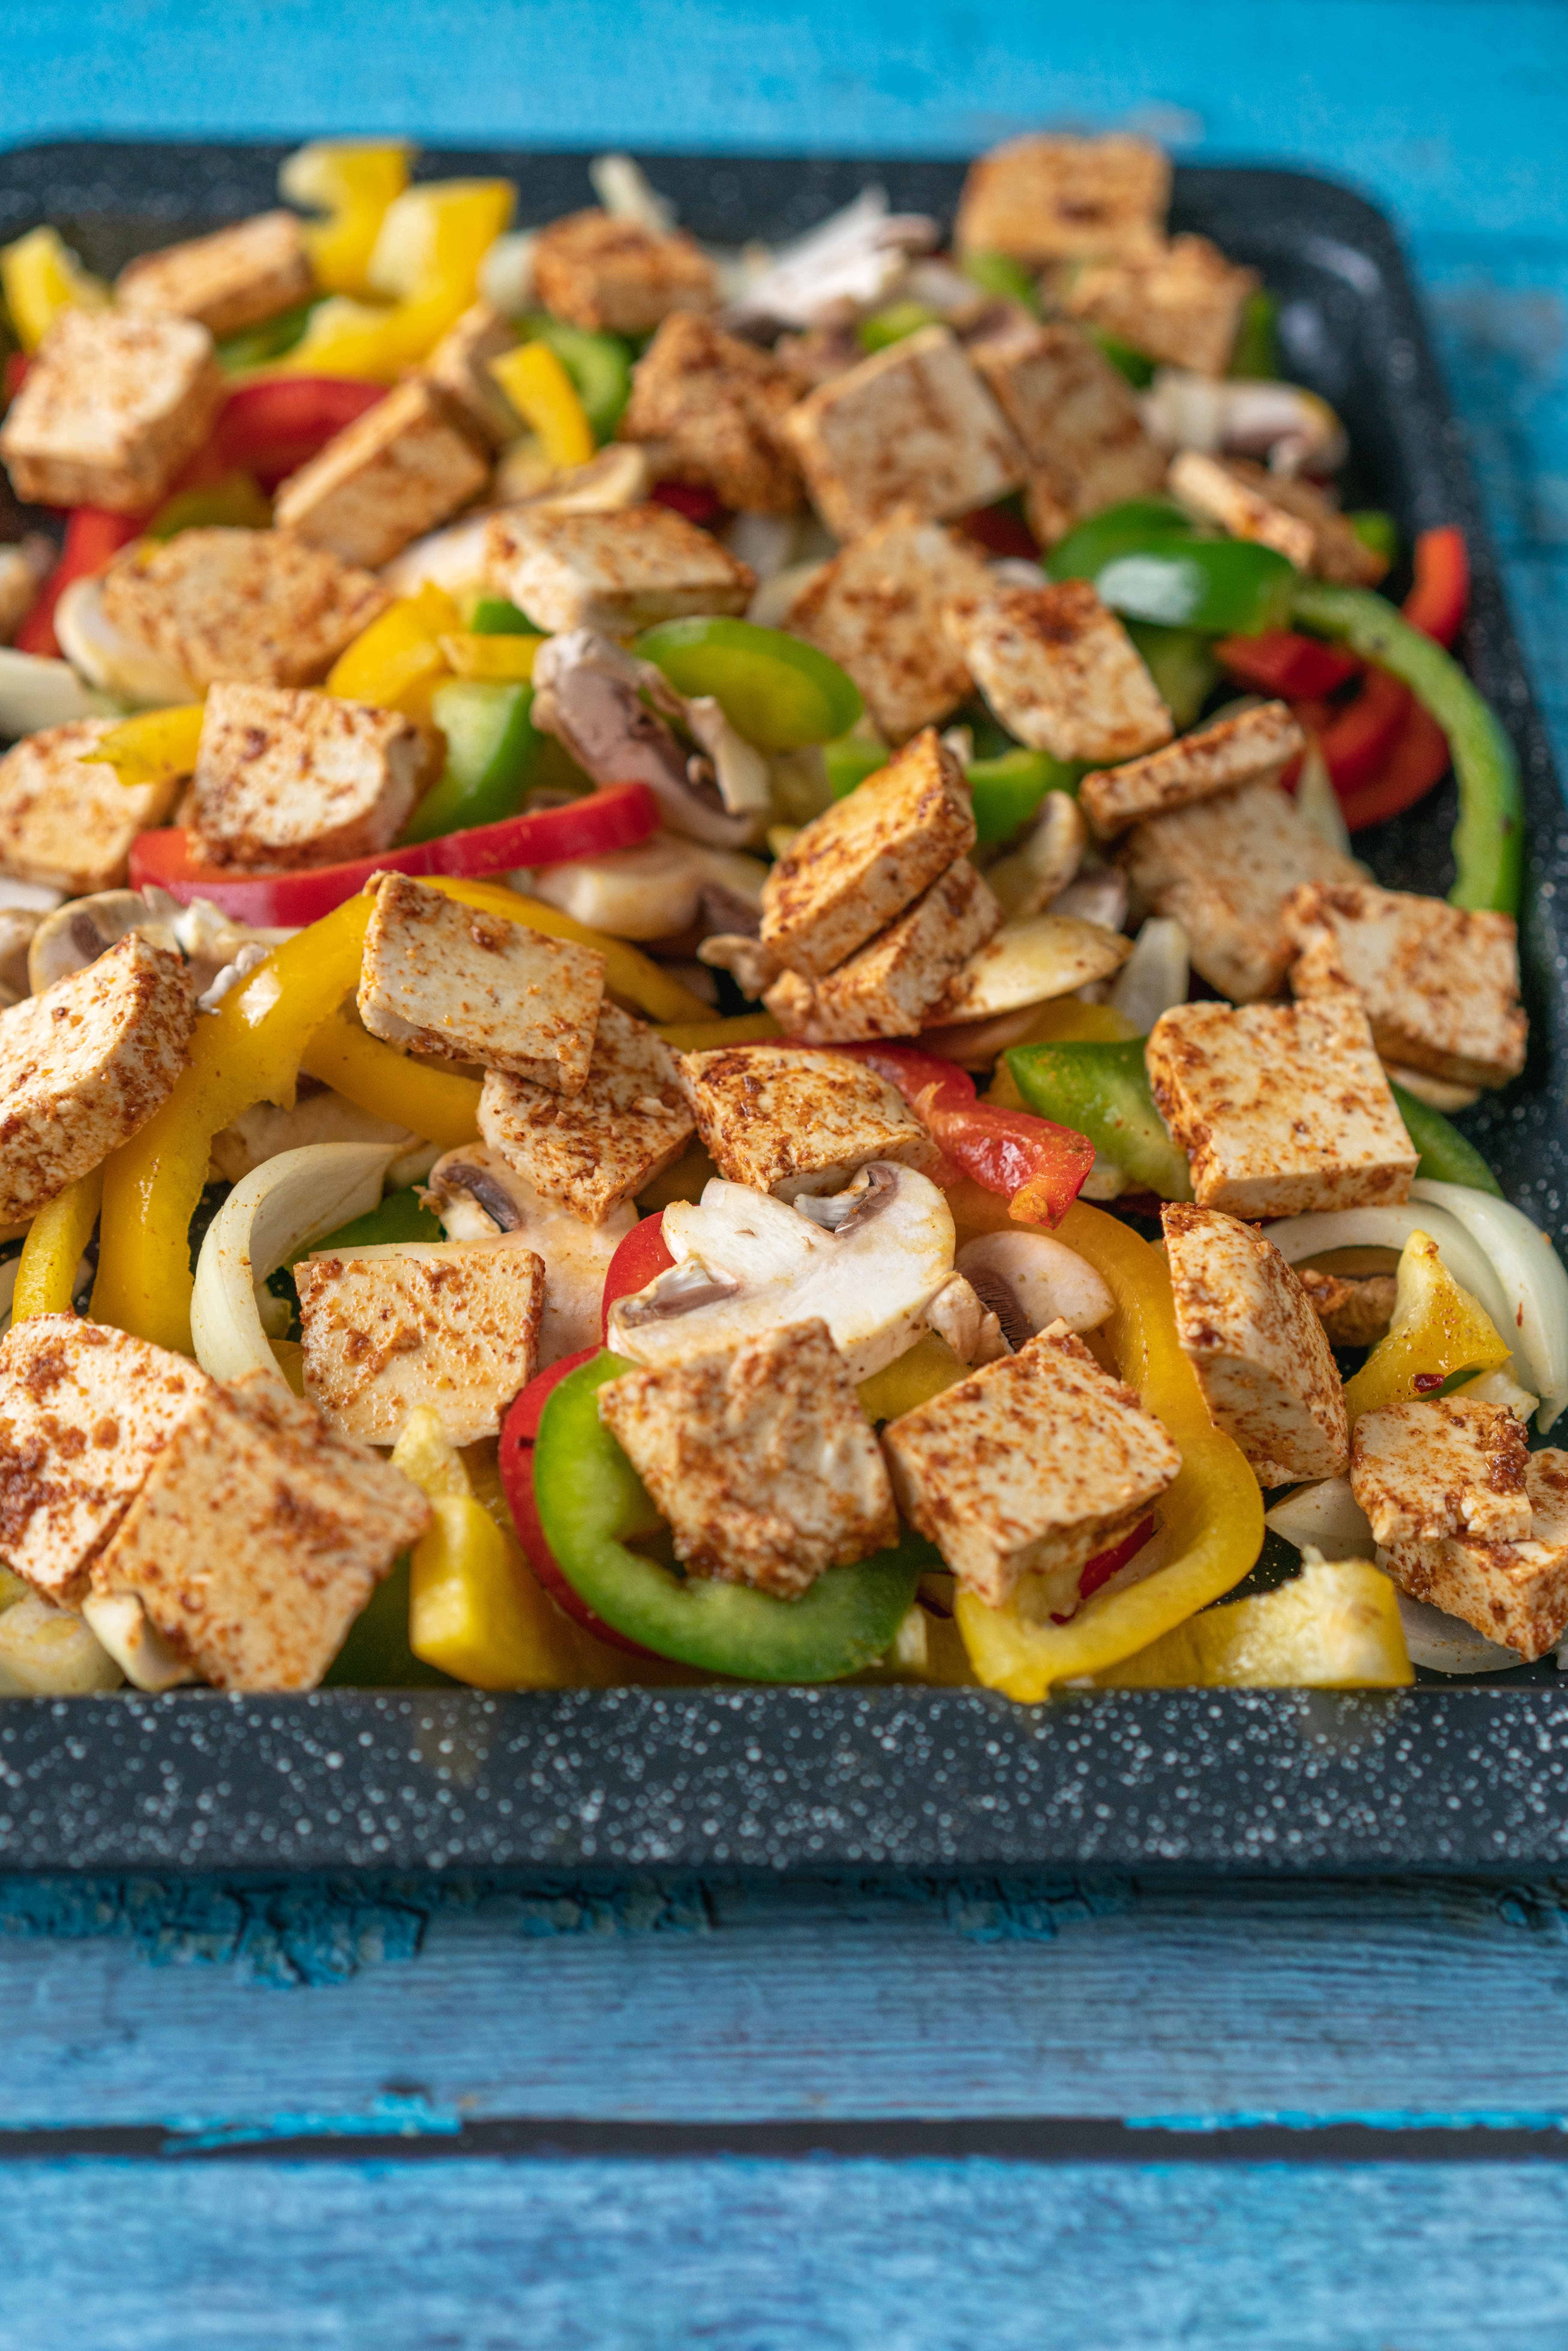 An easy and healthy tofu traybake with vegetables baked to perfection that will have you craving more! Vegan & Ready in 30 Mins.